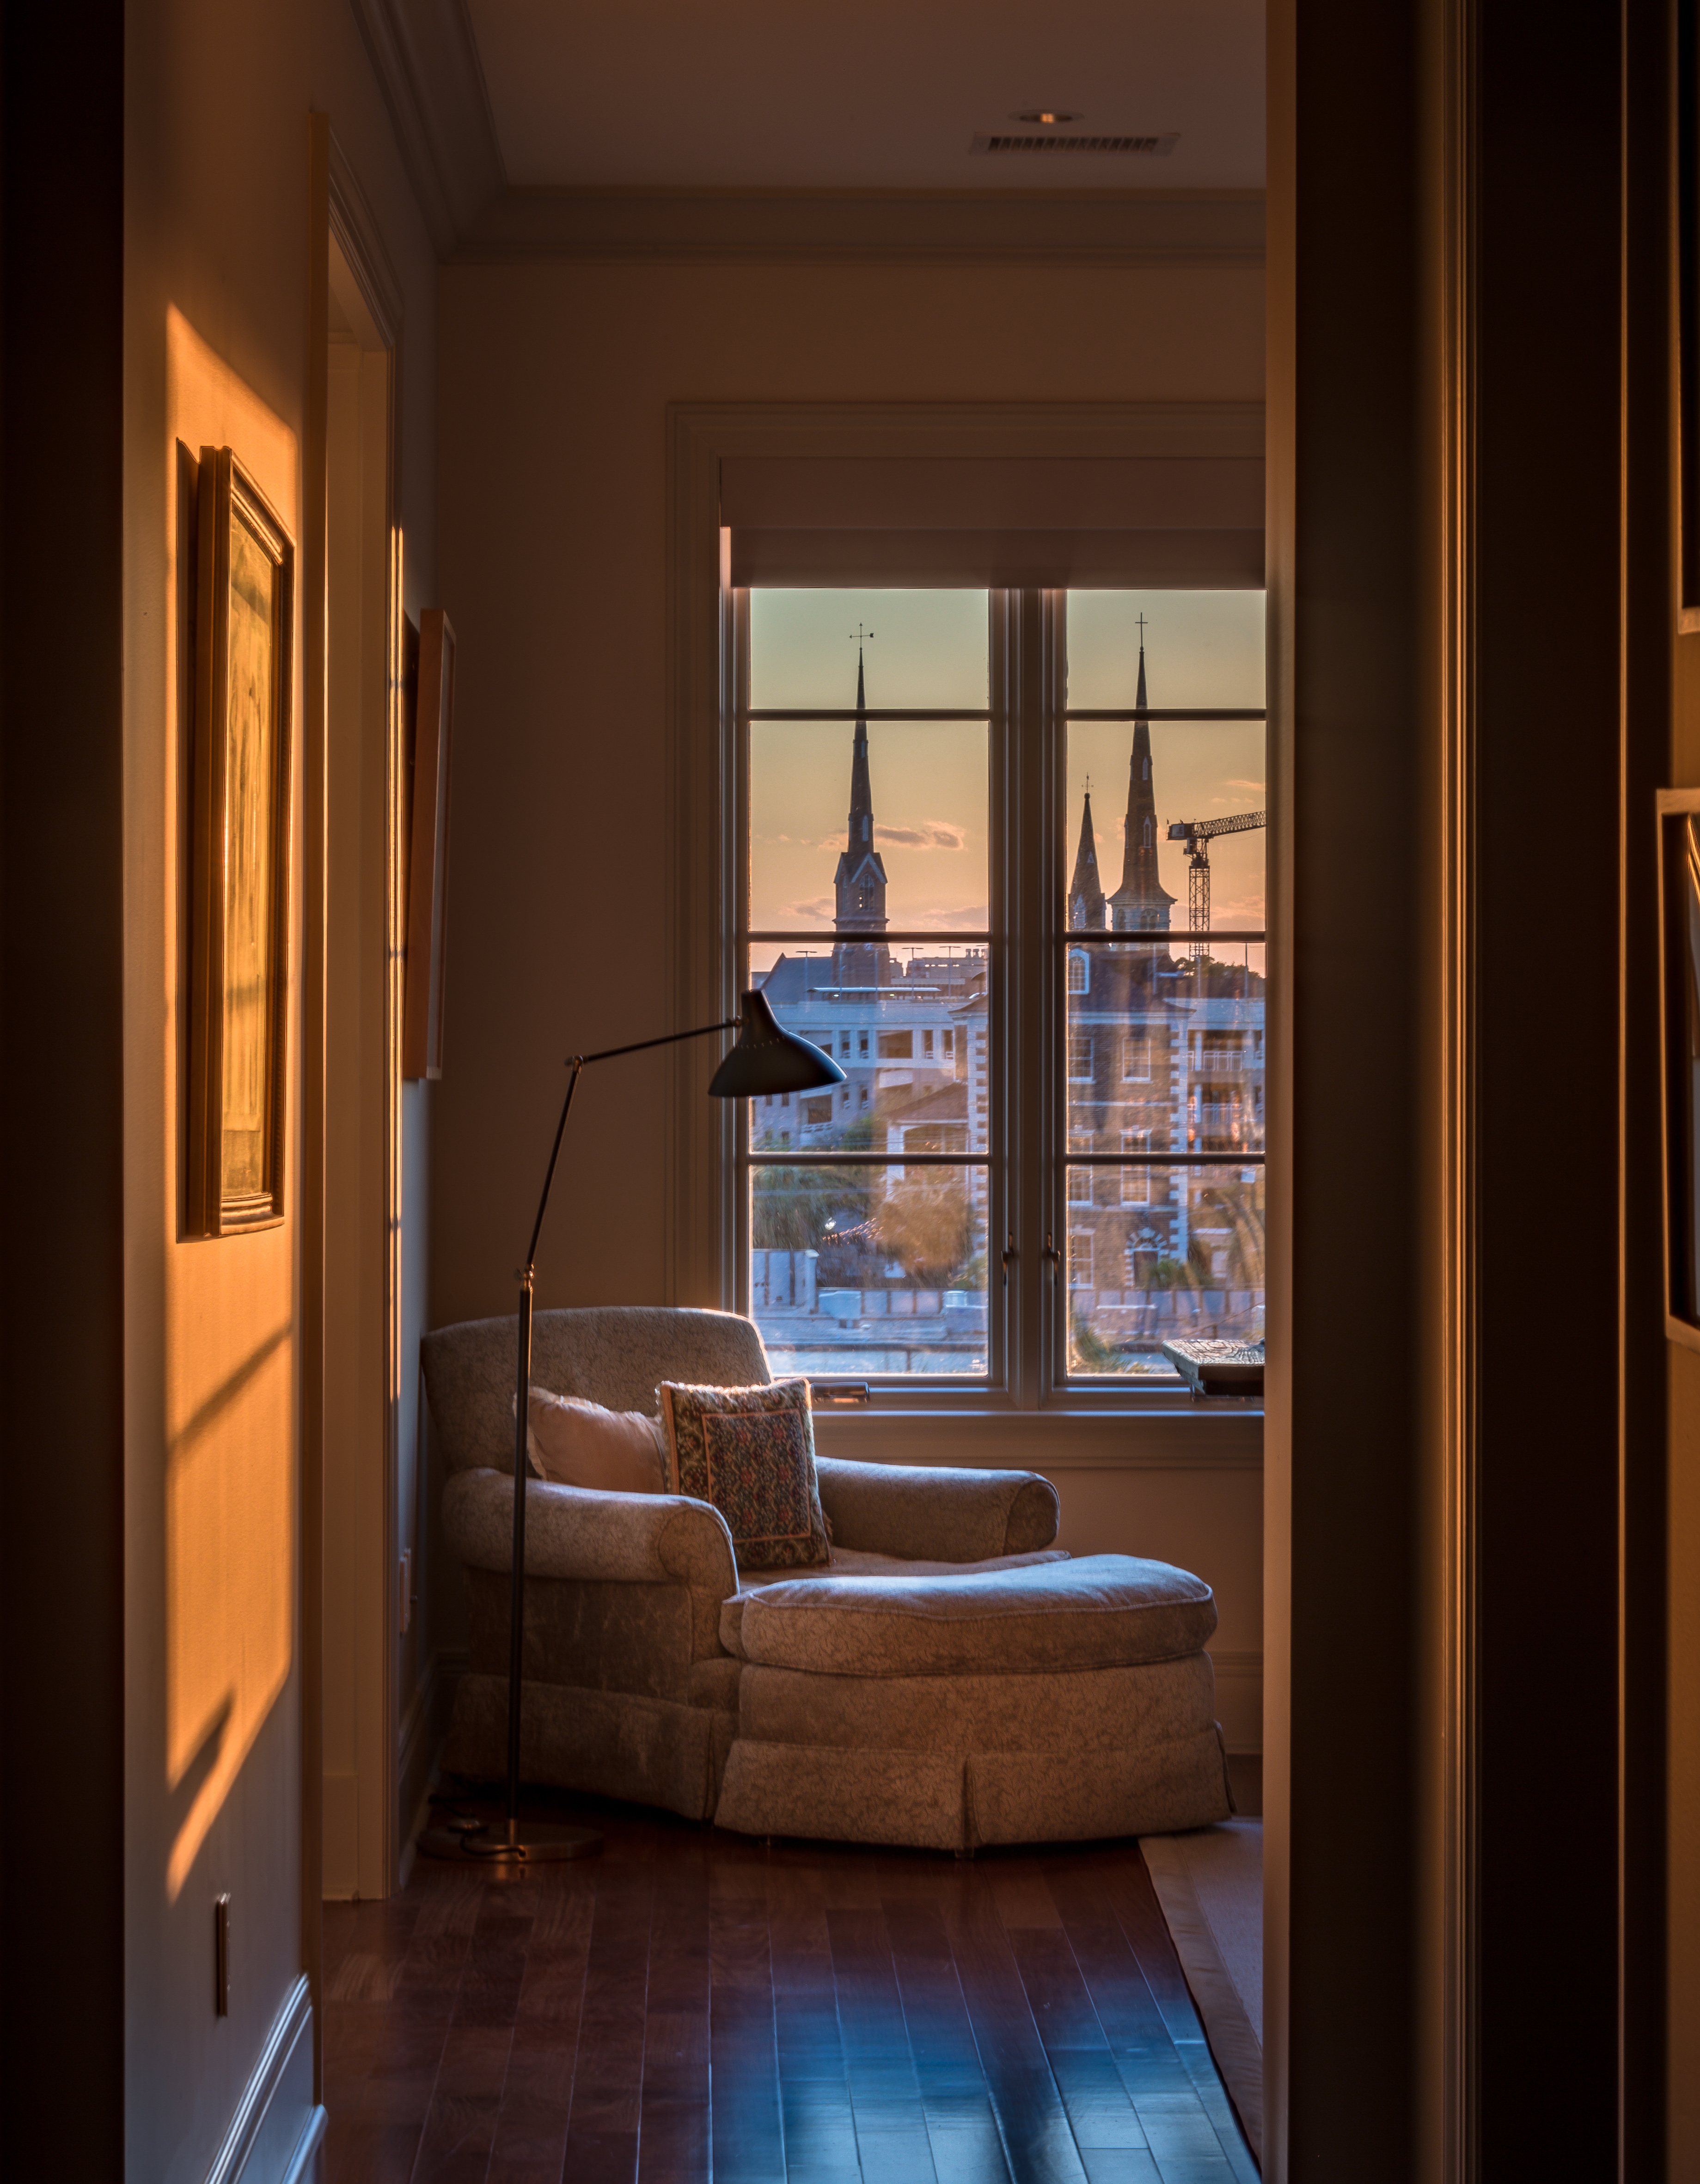 FINALIST Professional category Holy City by Josh Corrigan; “ A view from the window of a newer Charleston residence showing just how many church spires can be found in one place!”